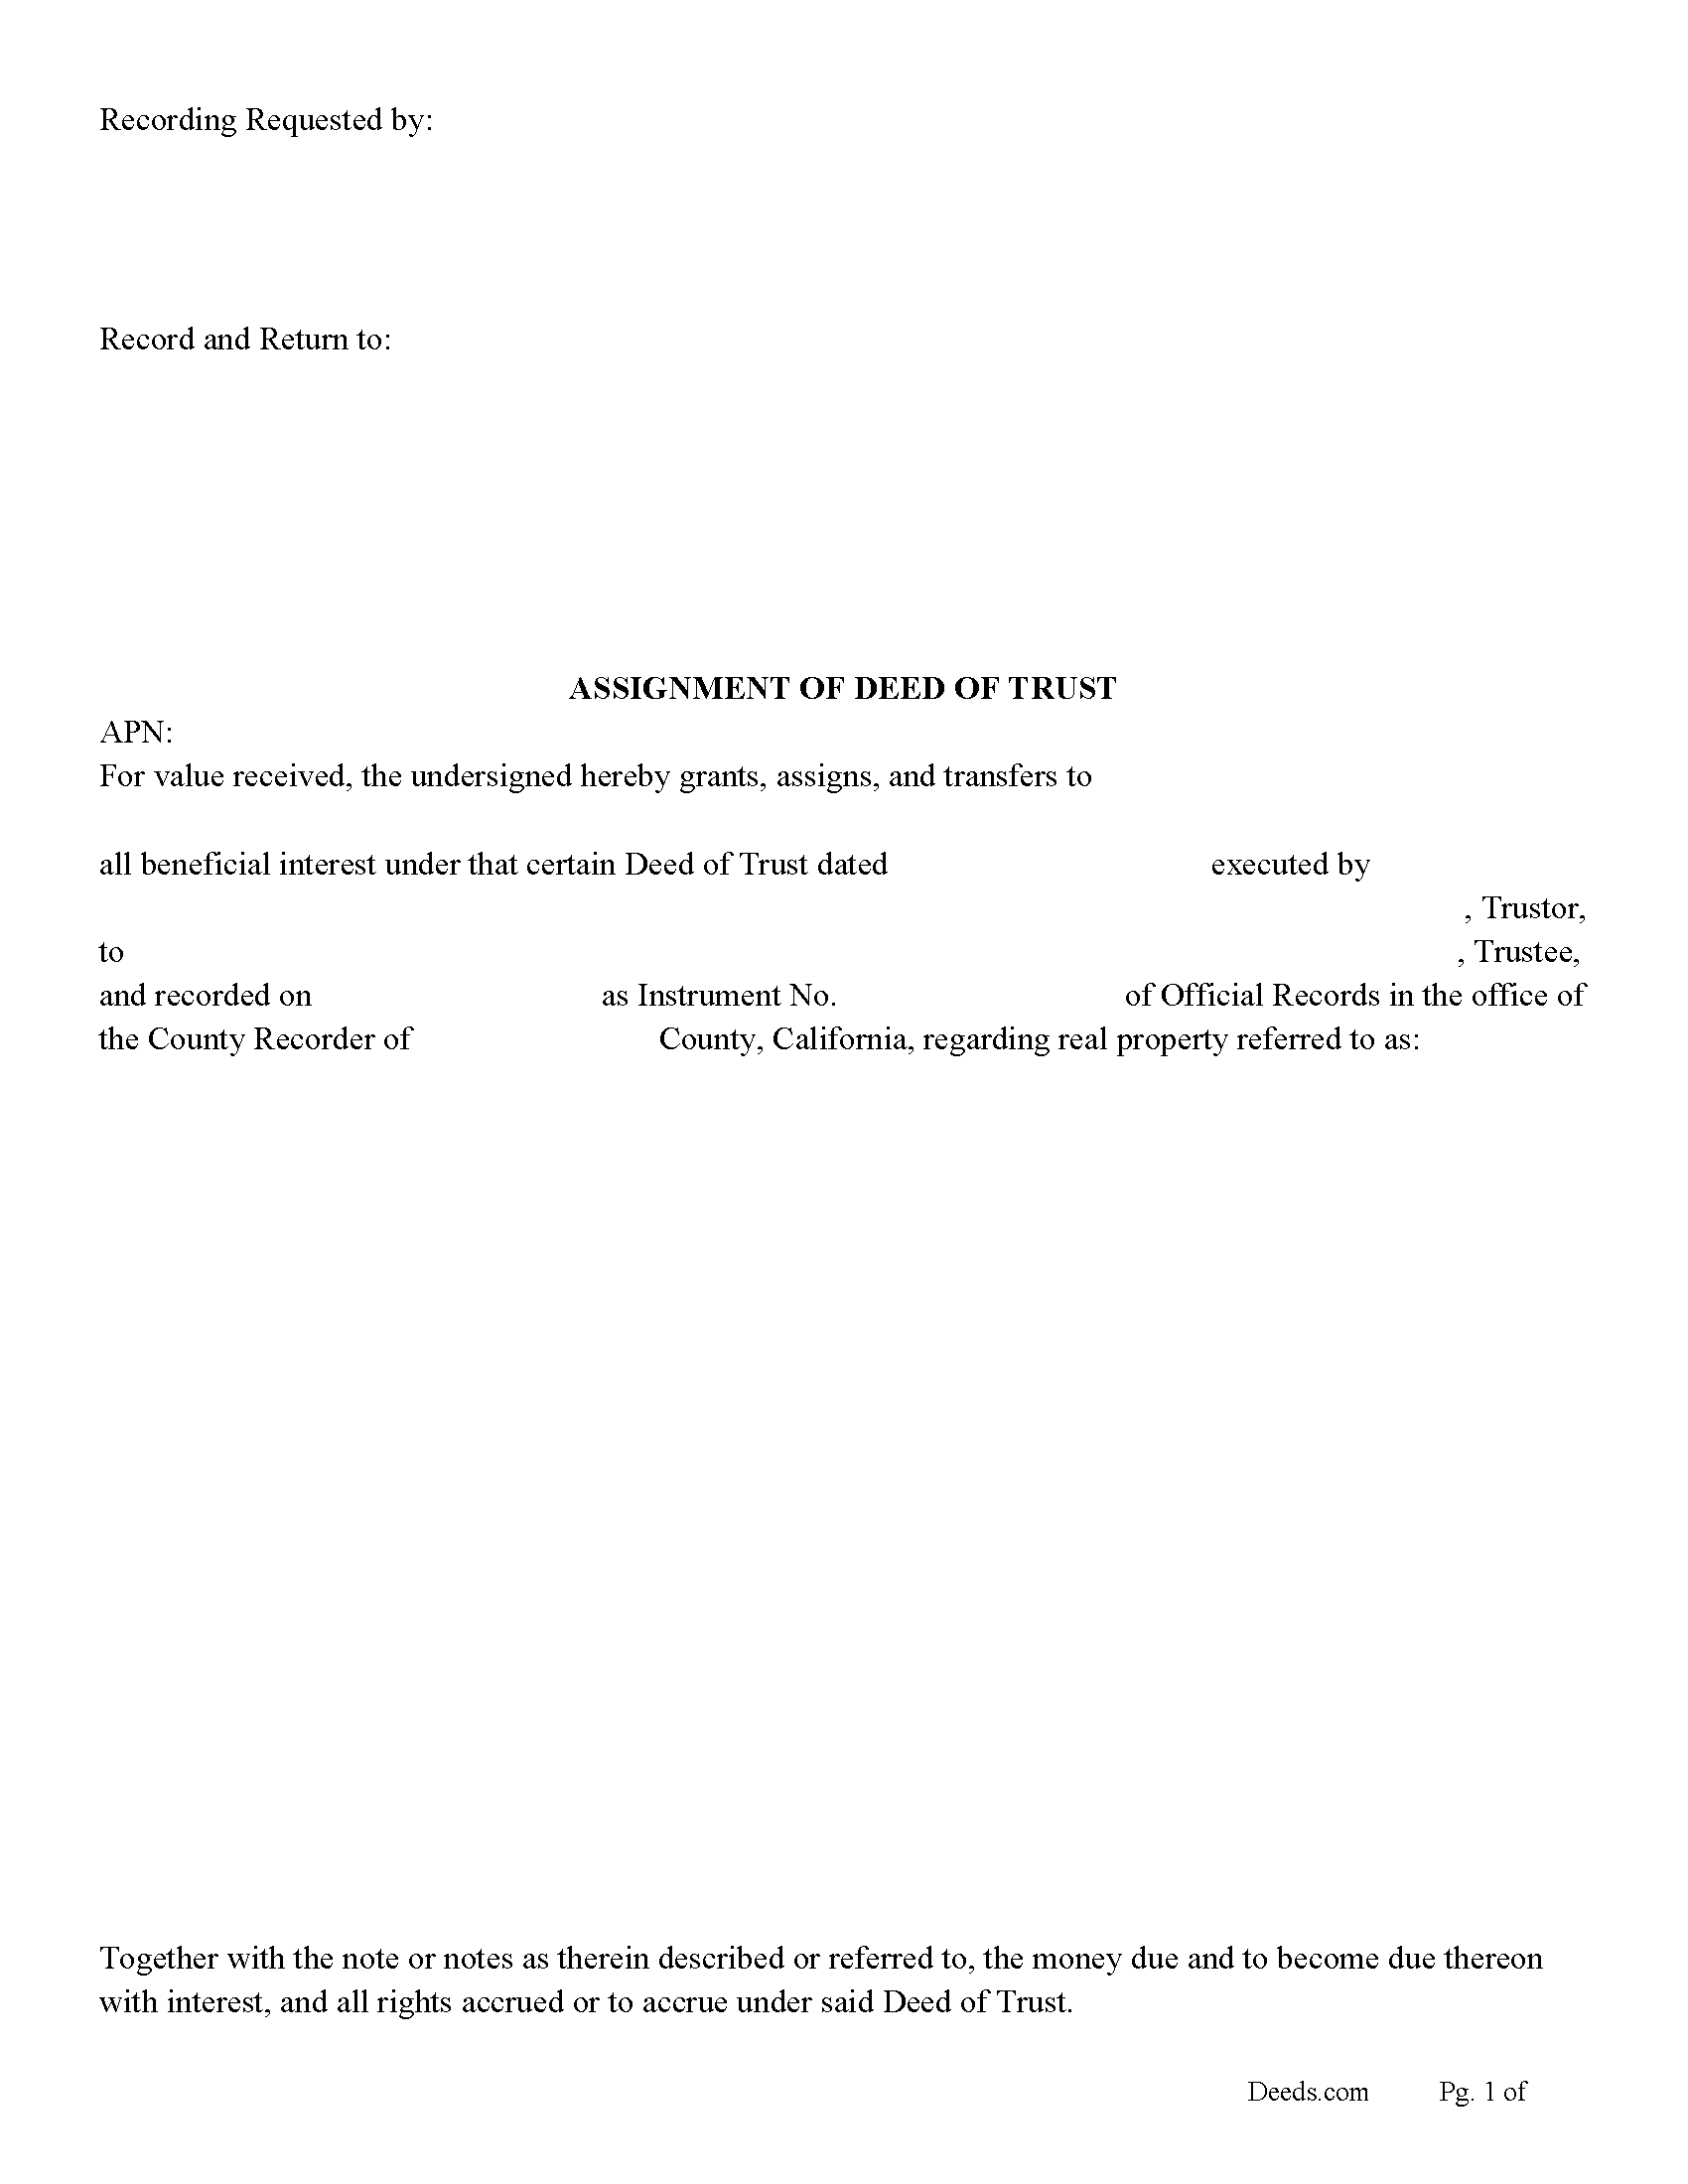 California Assignment of Deed of Trust Image